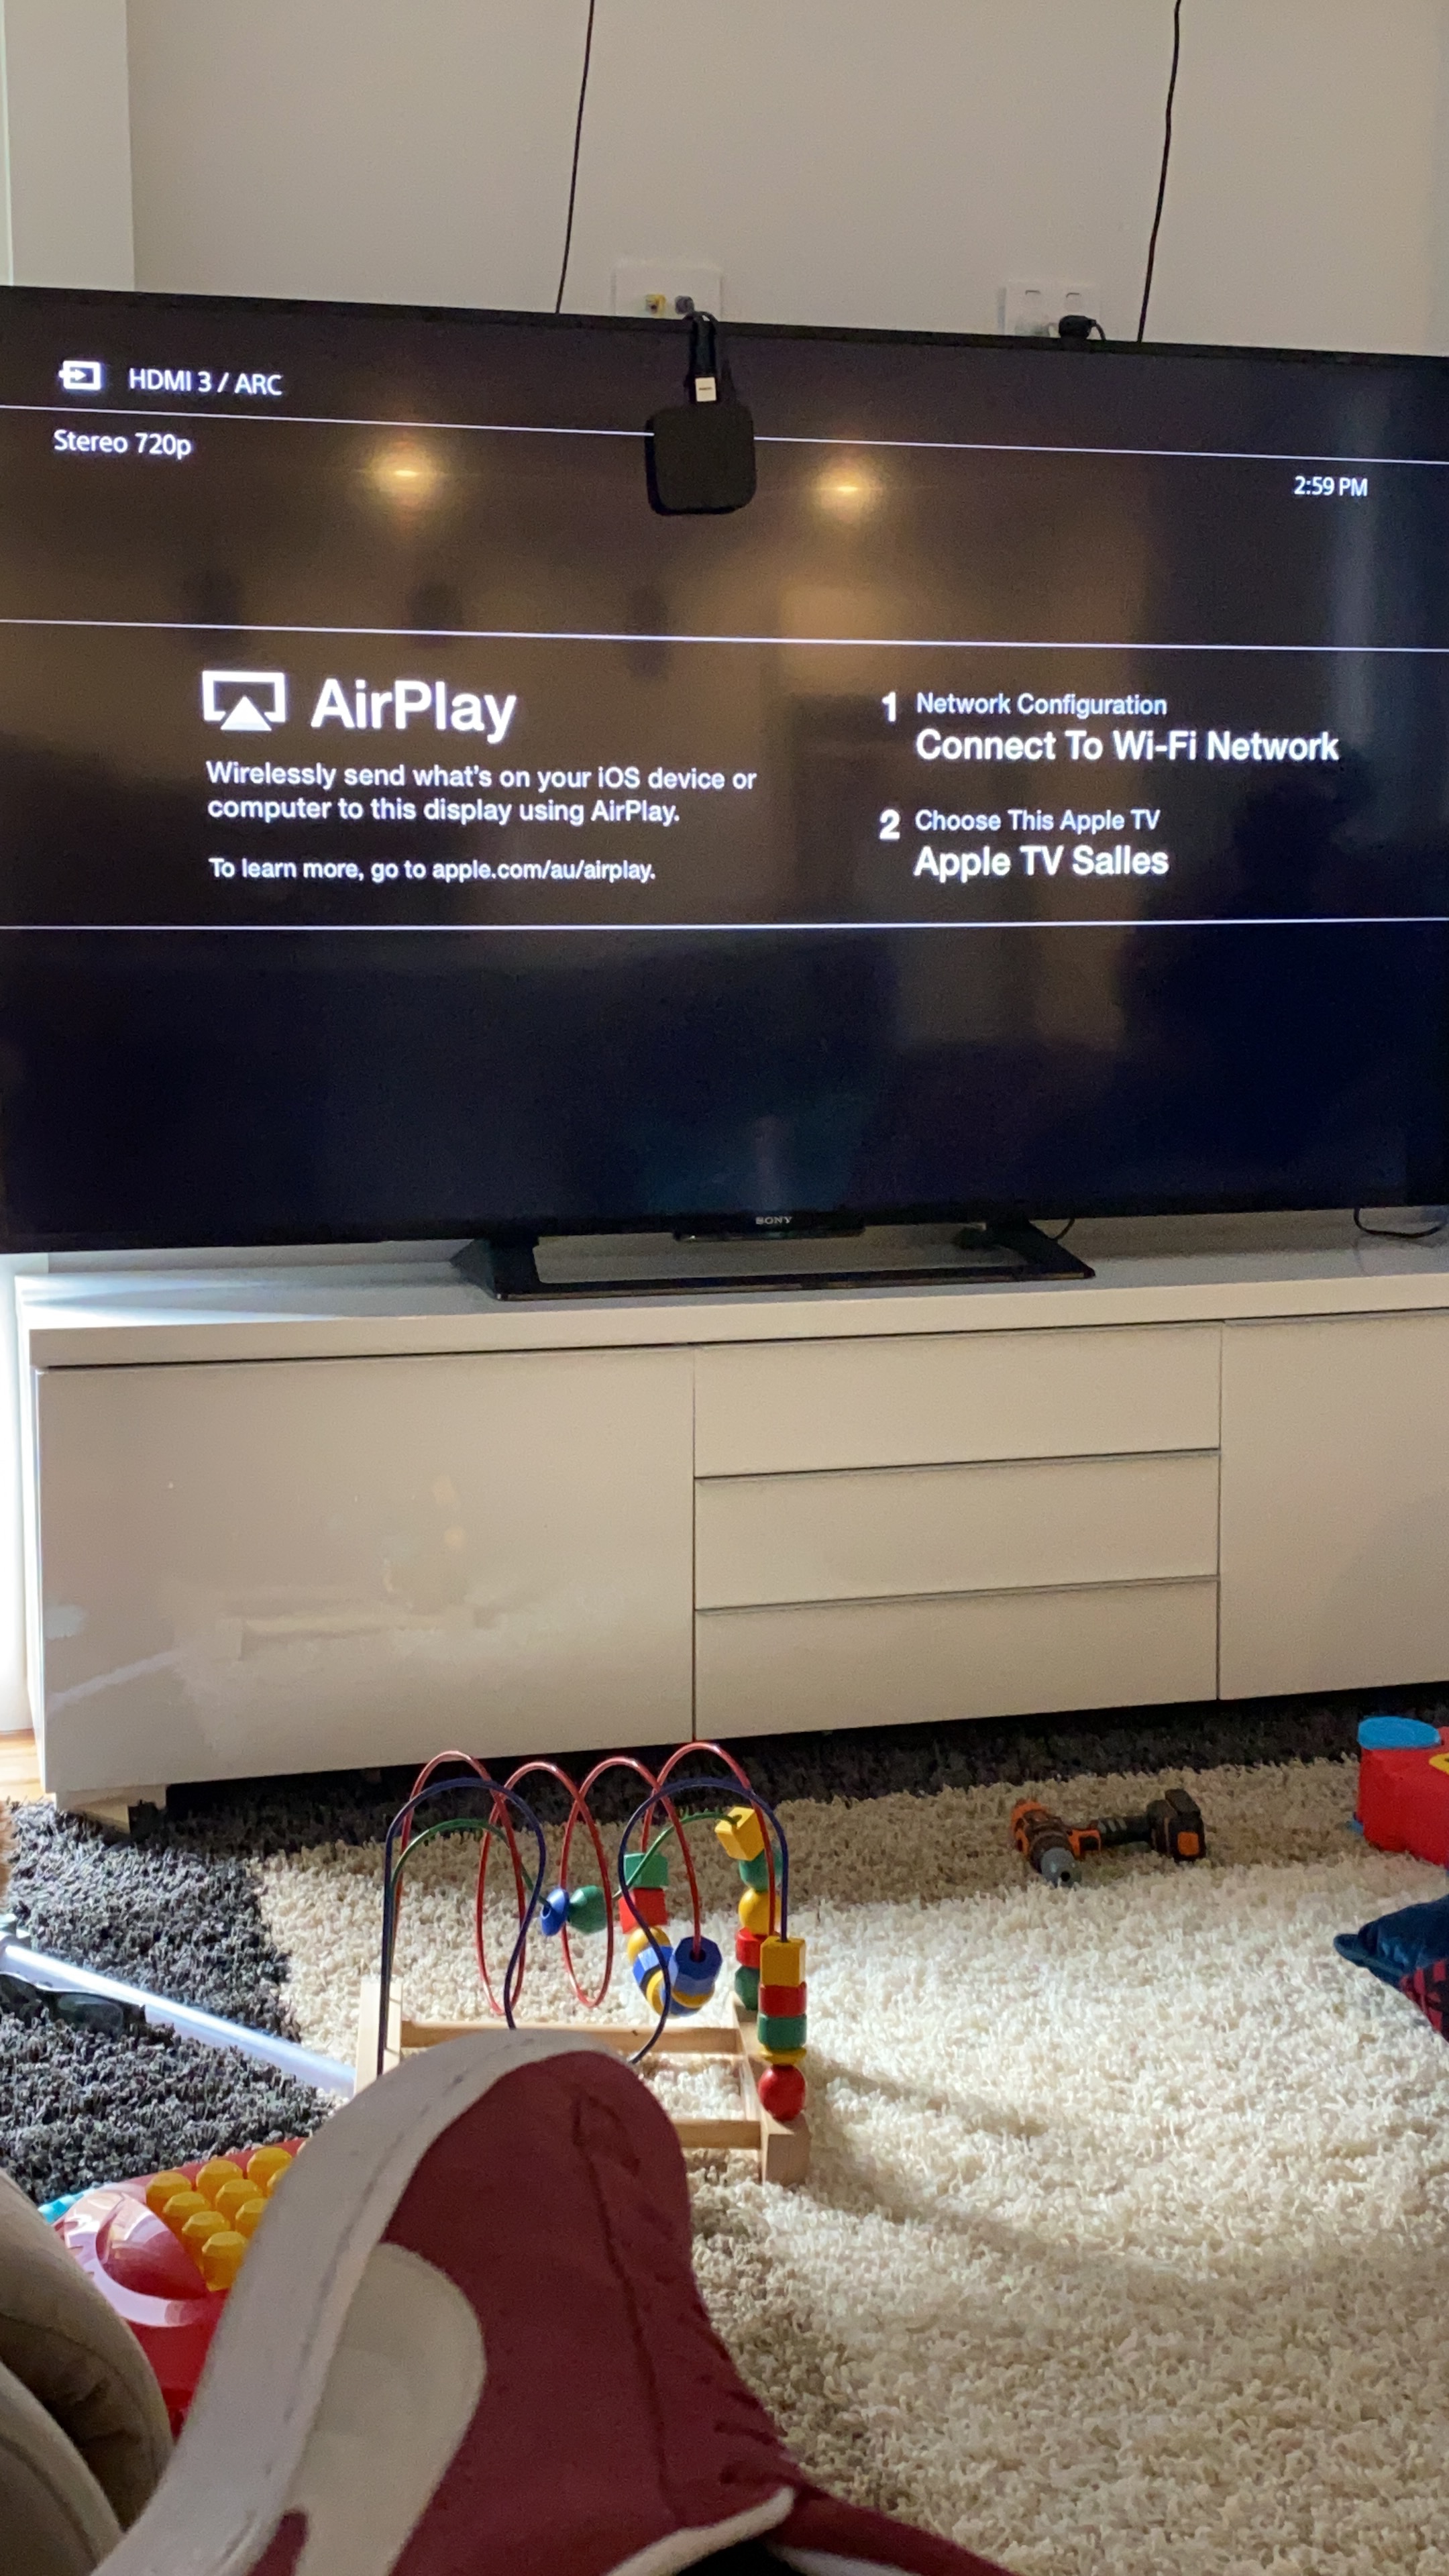 AIRPLAY MESSAGE STUCK MY SCREEN - Apple Community